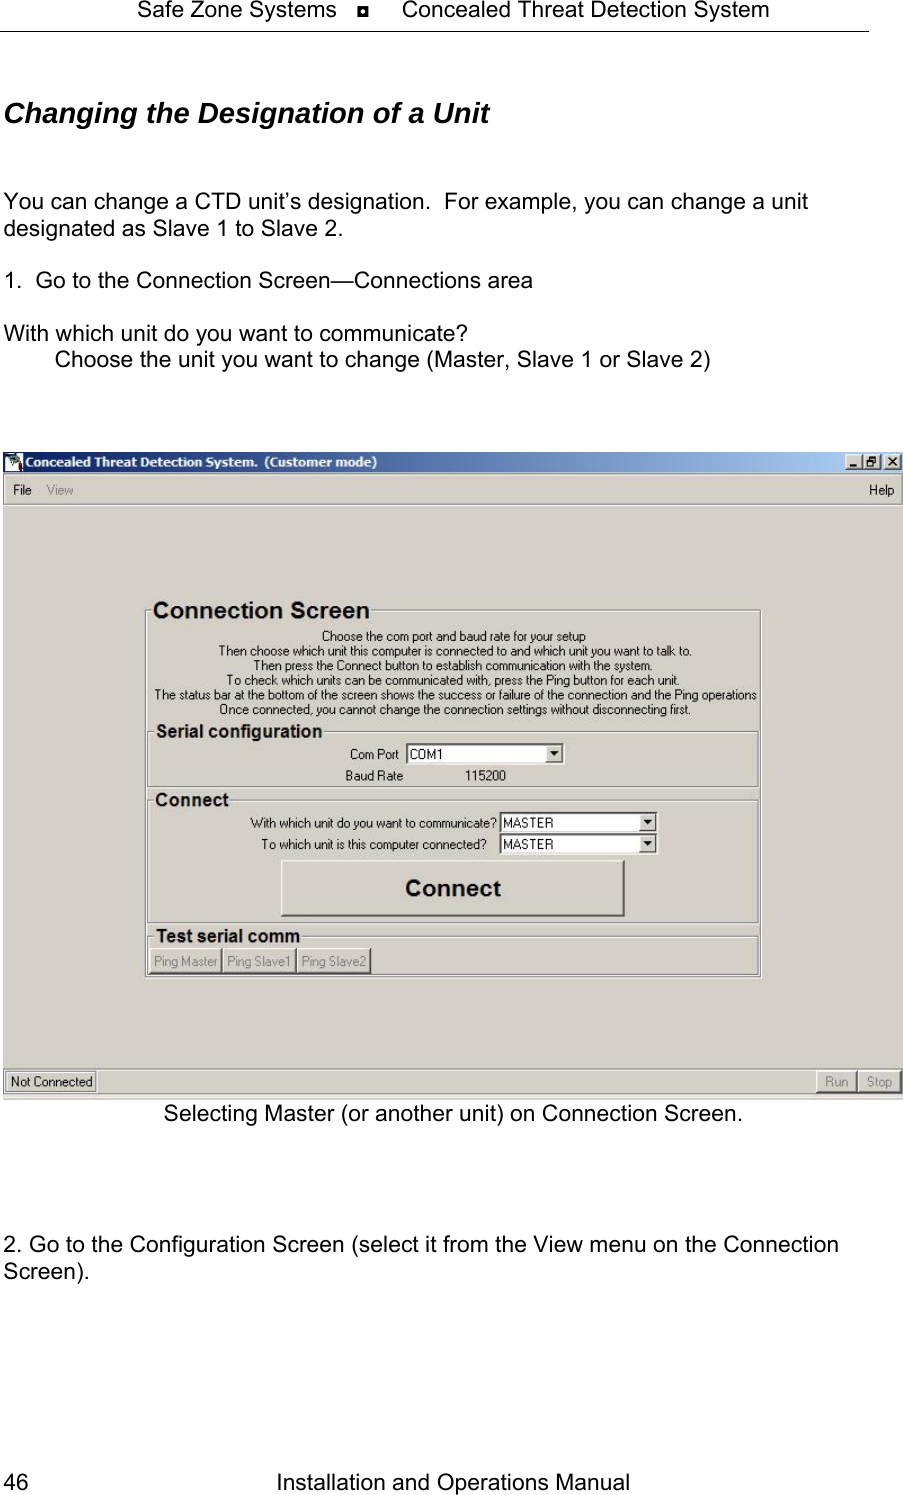 Safe Zone Systems   ◘     Concealed Threat Detection System  Changing the Designation of a Unit   You can change a CTD unit’s designation.  For example, you can change a unit designated as Slave 1 to Slave 2.  1.  Go to the Connection Screen—Connections area  With which unit do you want to communicate?            Choose the unit you want to change (Master, Slave 1 or Slave 2)     Selecting Master (or another unit) on Connection Screen.       2. Go to the Configuration Screen (select it from the View menu on the Connection Screen).  Installation and Operations Manual 46 